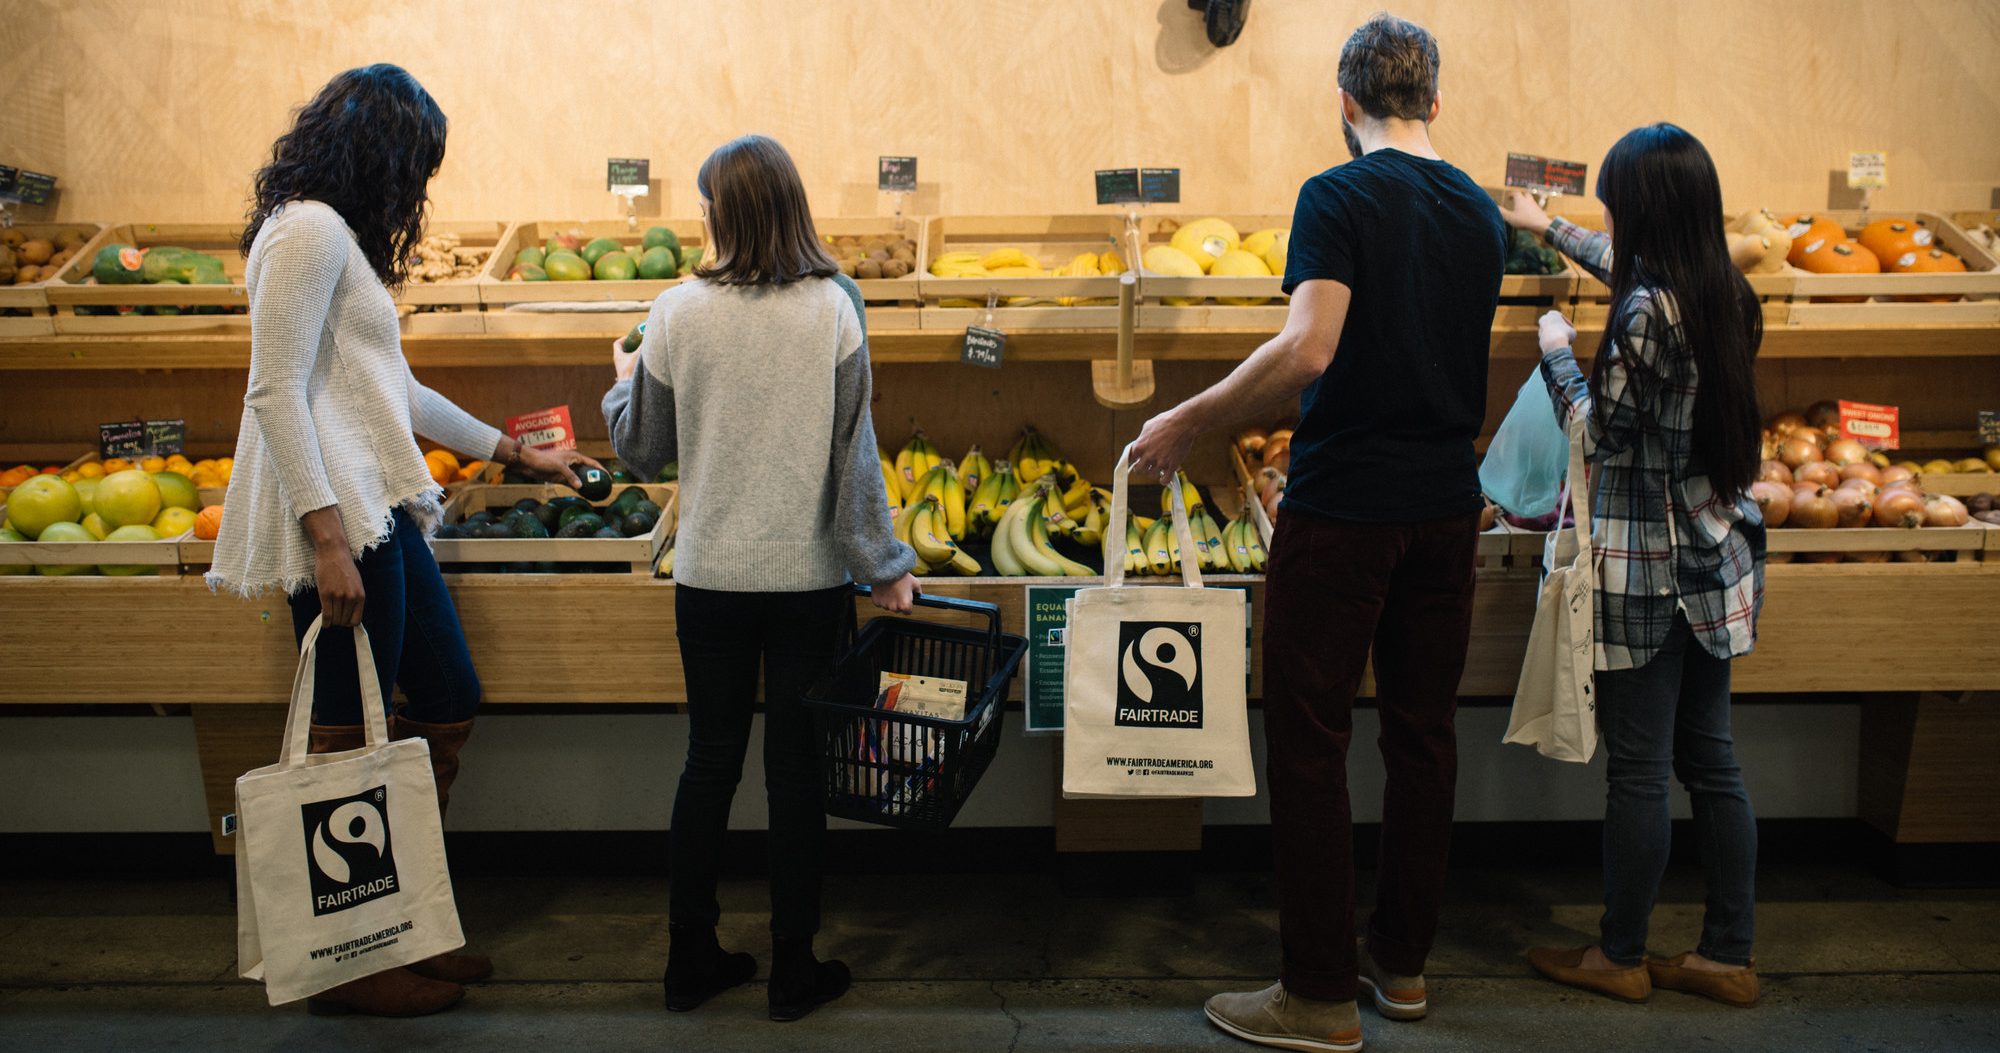 Four people shopping in the produce section at an organic market in Washington, DC.